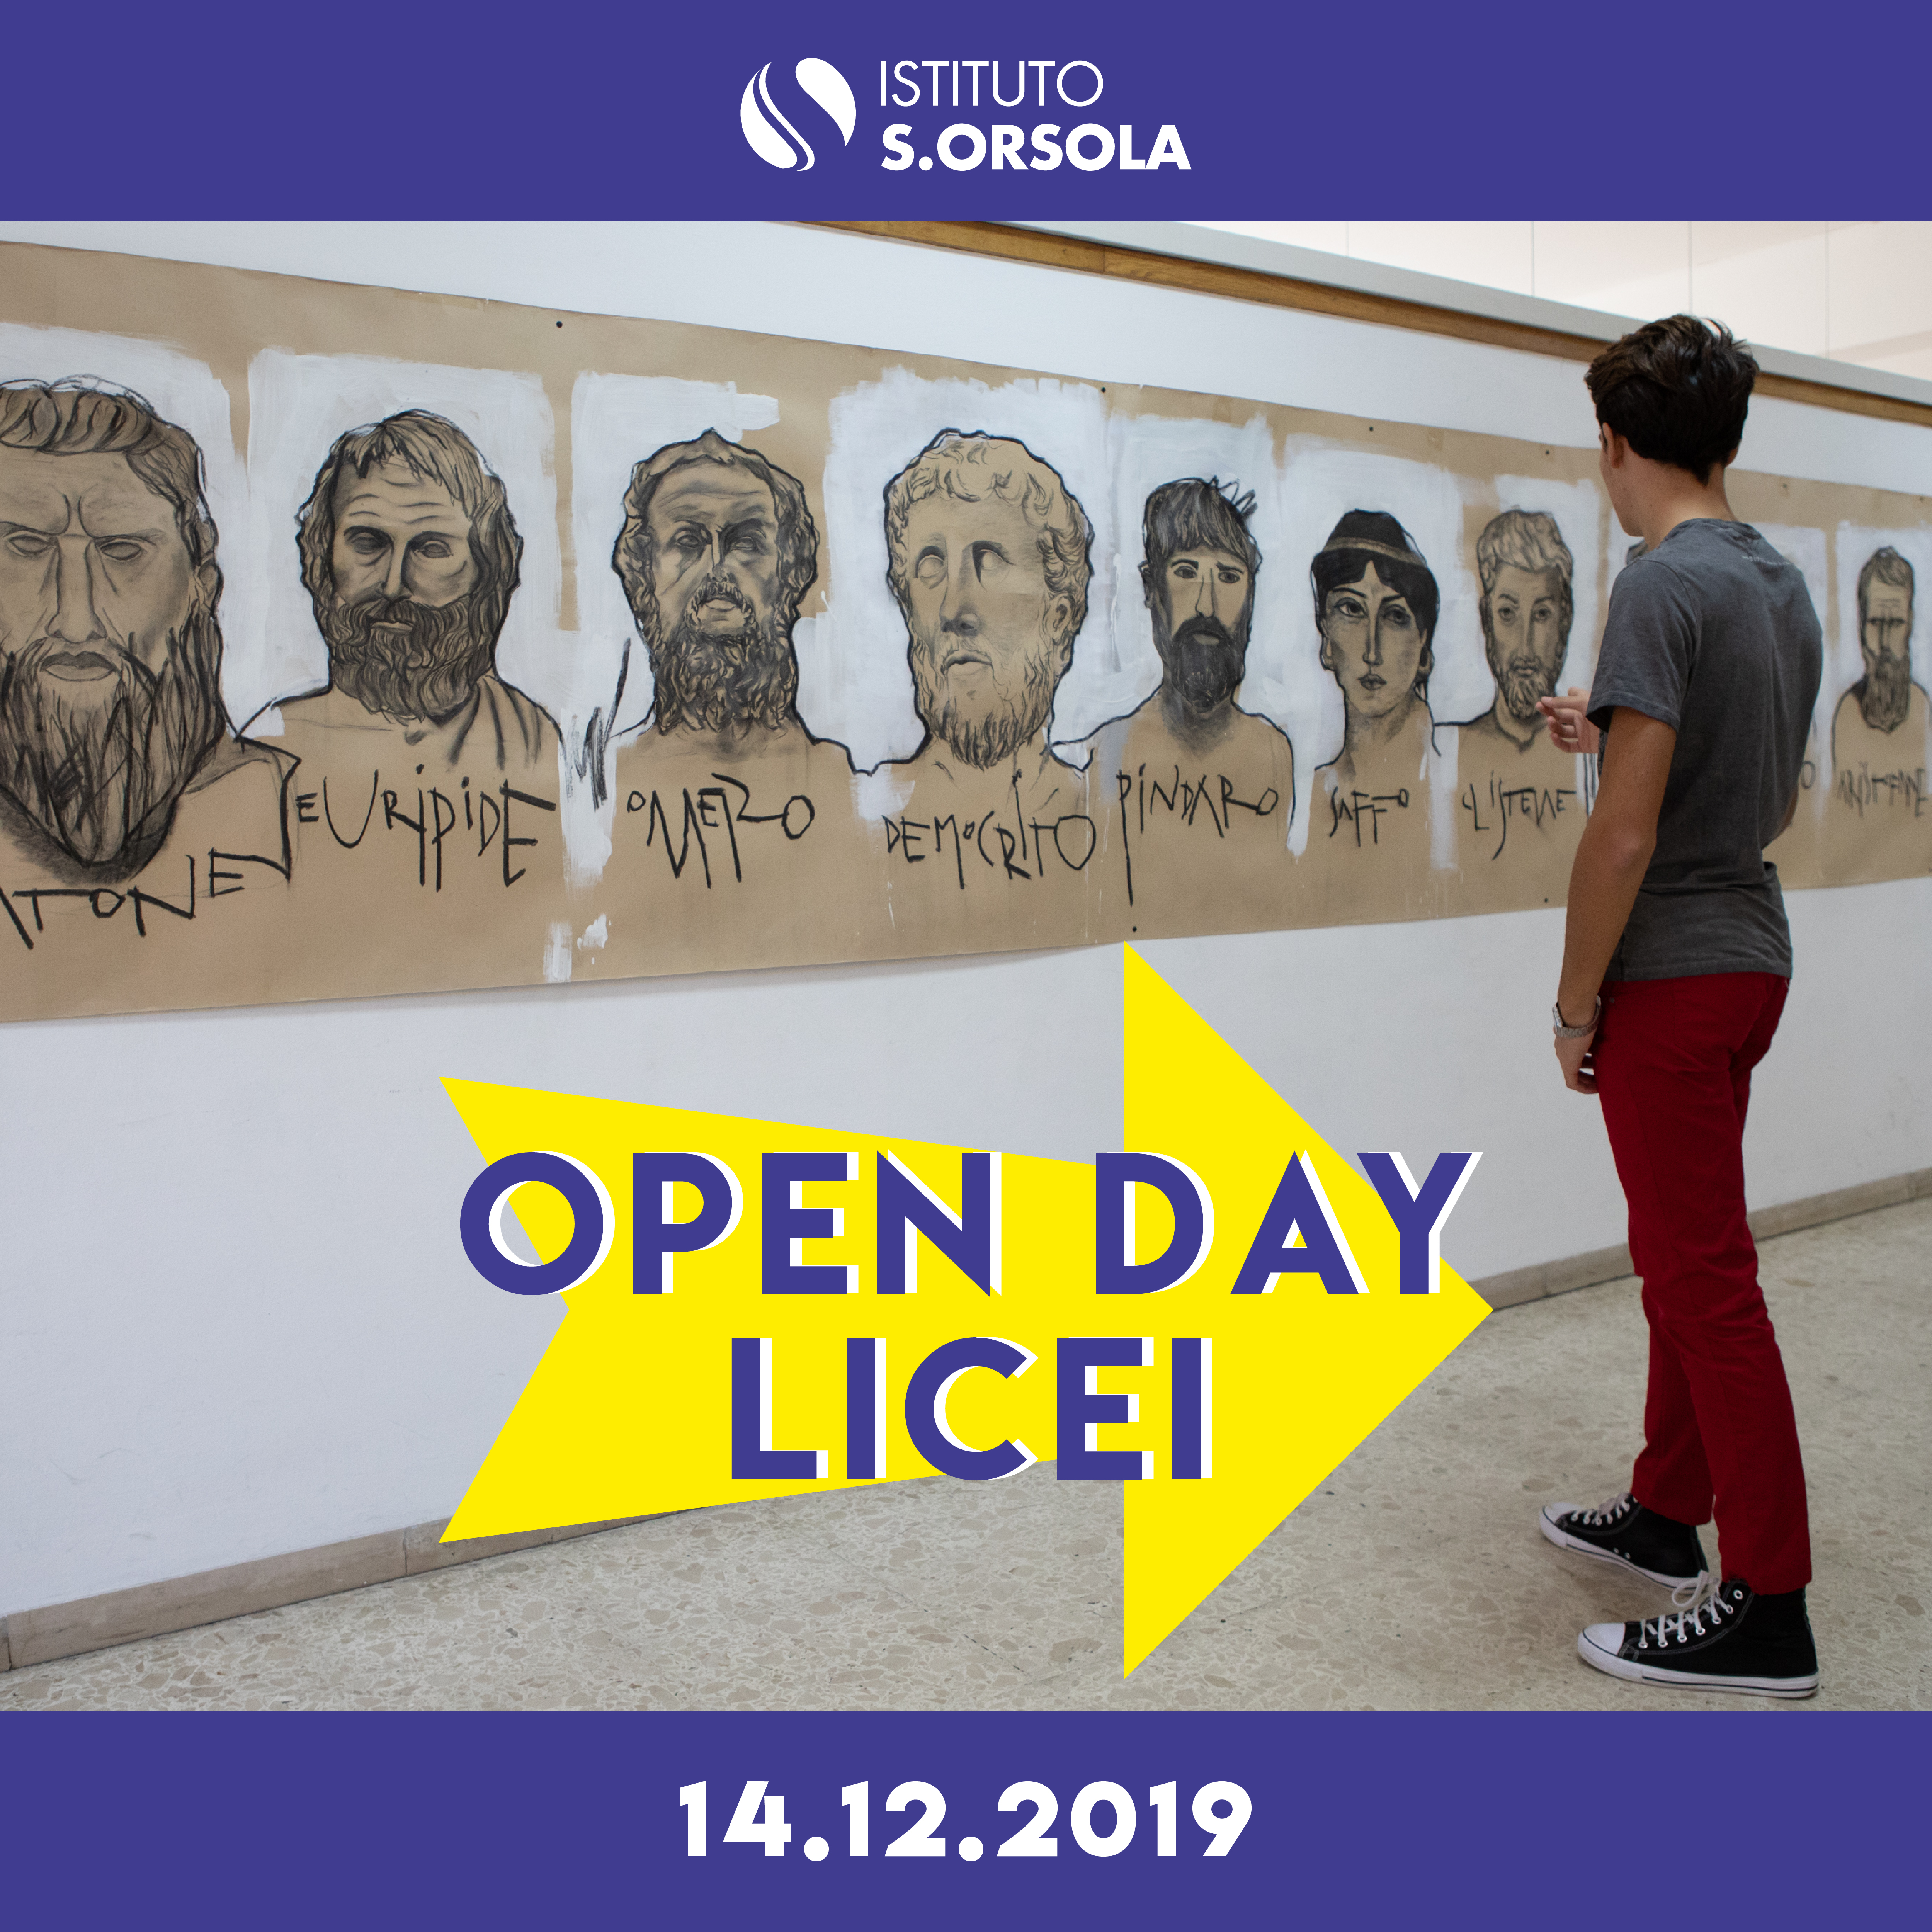 OPEN DAY LICEI 14 12 2019